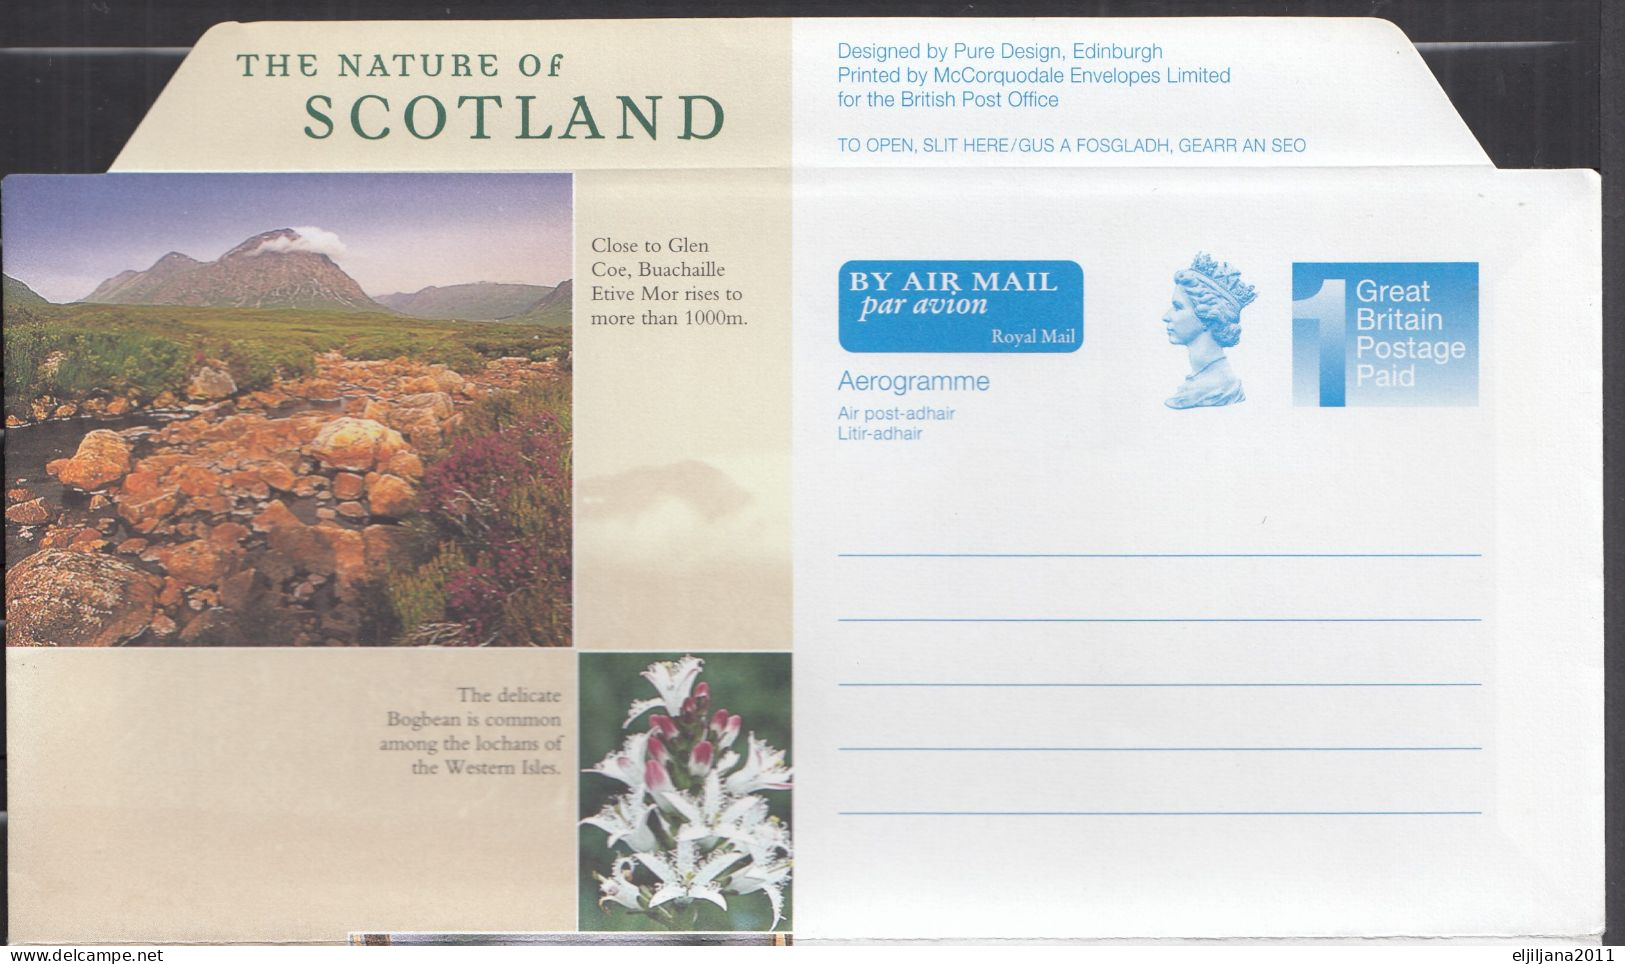 Great Britain - GB / UK, QEII 1997 ⁕ BY AIR MAIL Aerogramme, Royal Mail, The Nature Of SCOTLAND ⁕ Unused Cover - Luftpost & Aerogramme